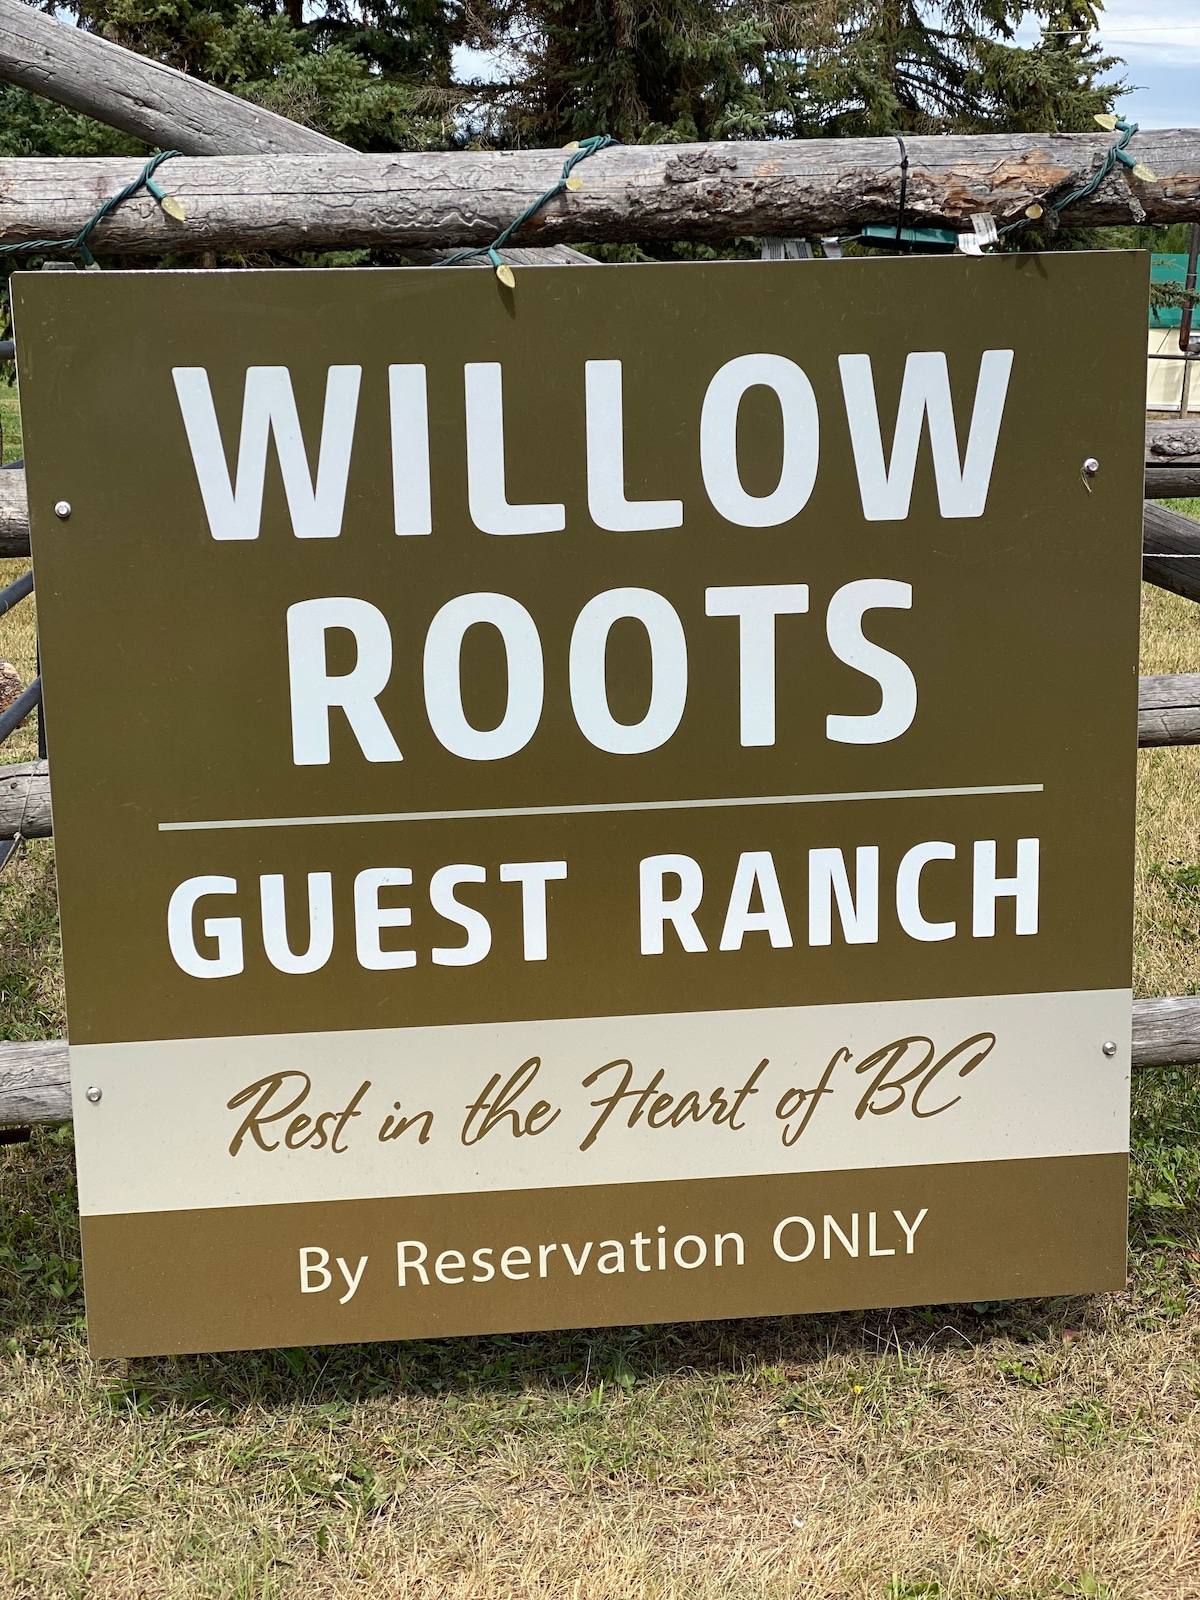 WillowRoots Guest Ranch